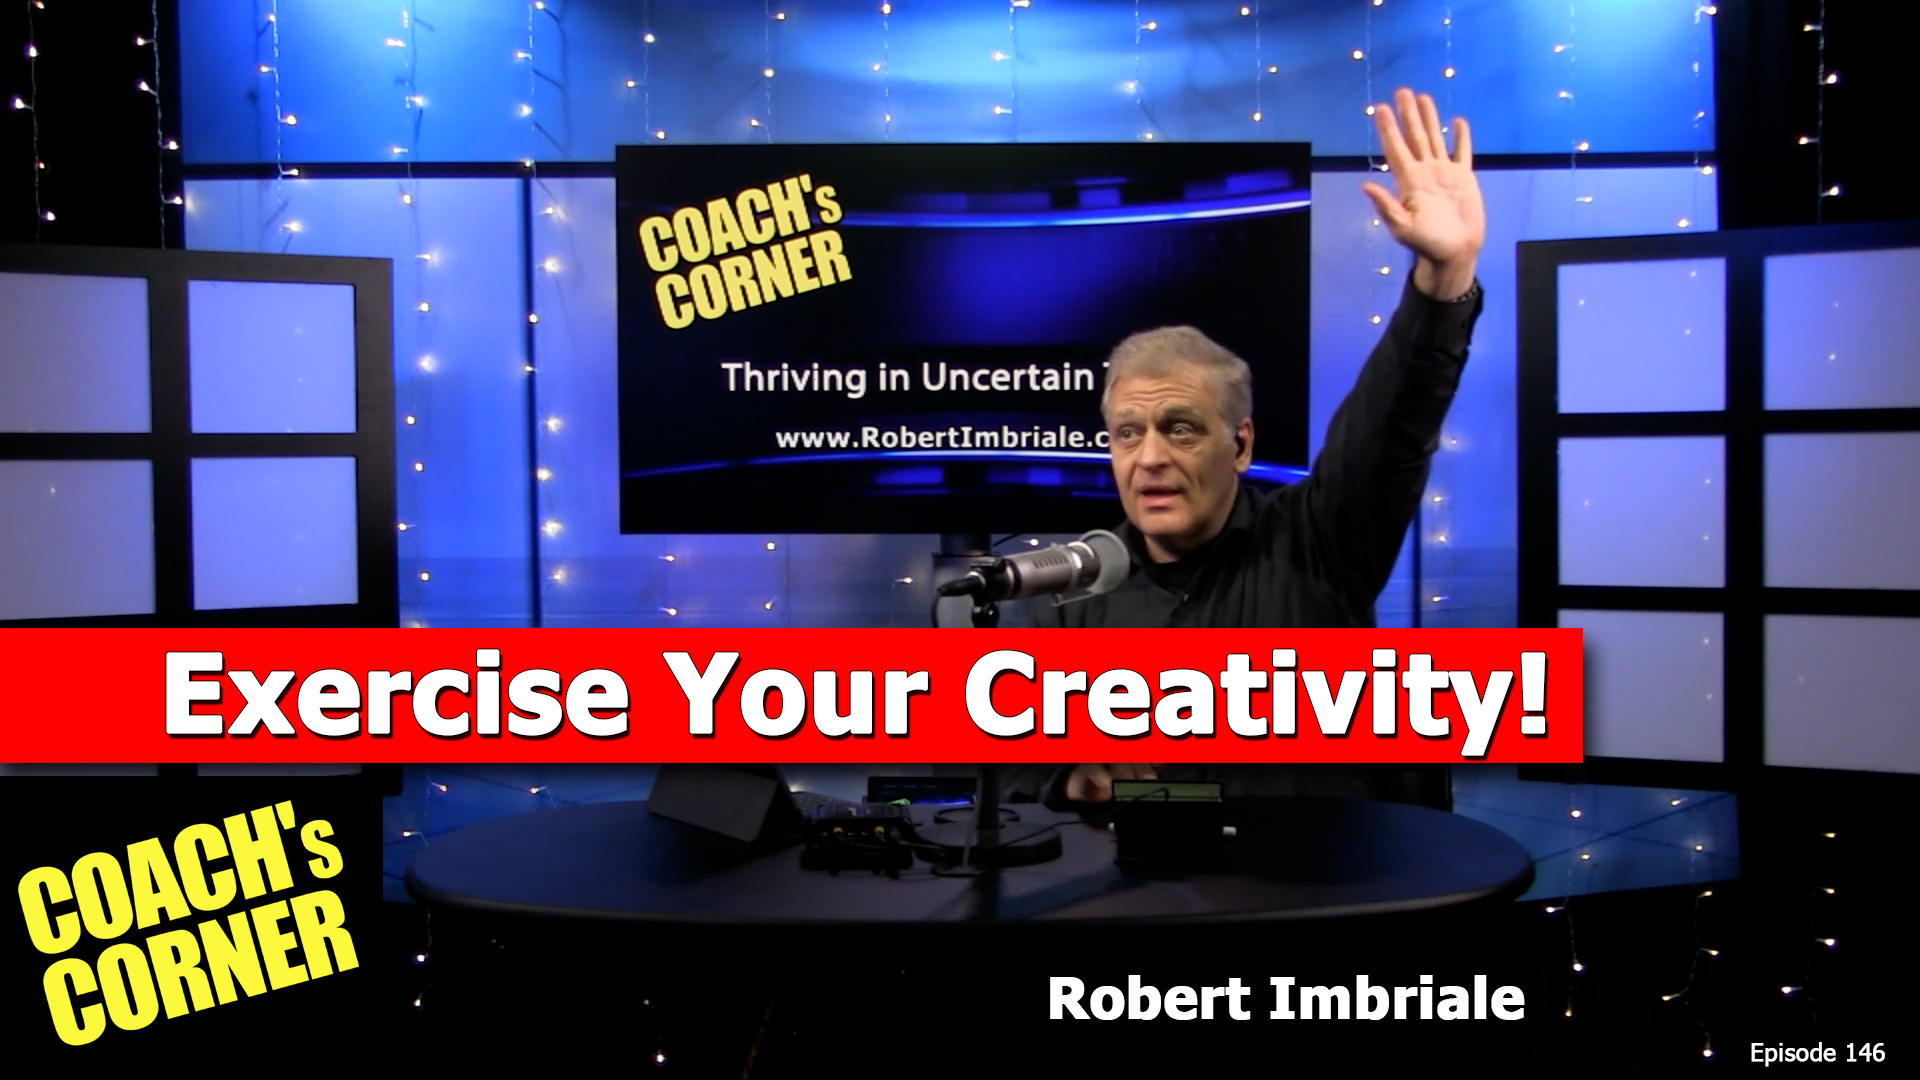 In Tough Times, Ignite Your Creativity